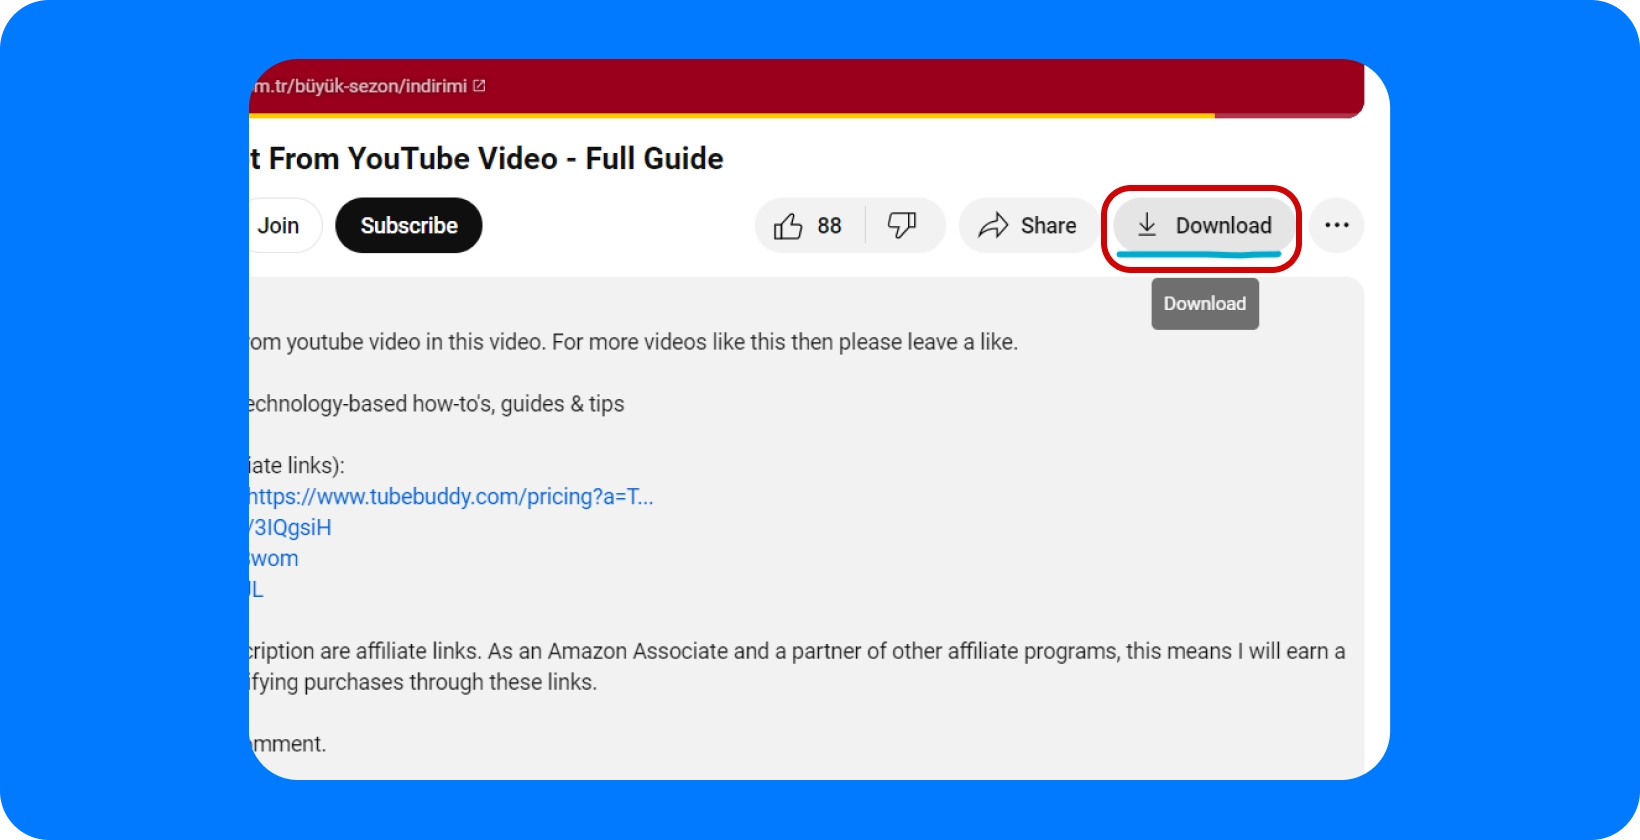 YouTube video description detailing a full guide on how to extract video, with download button.